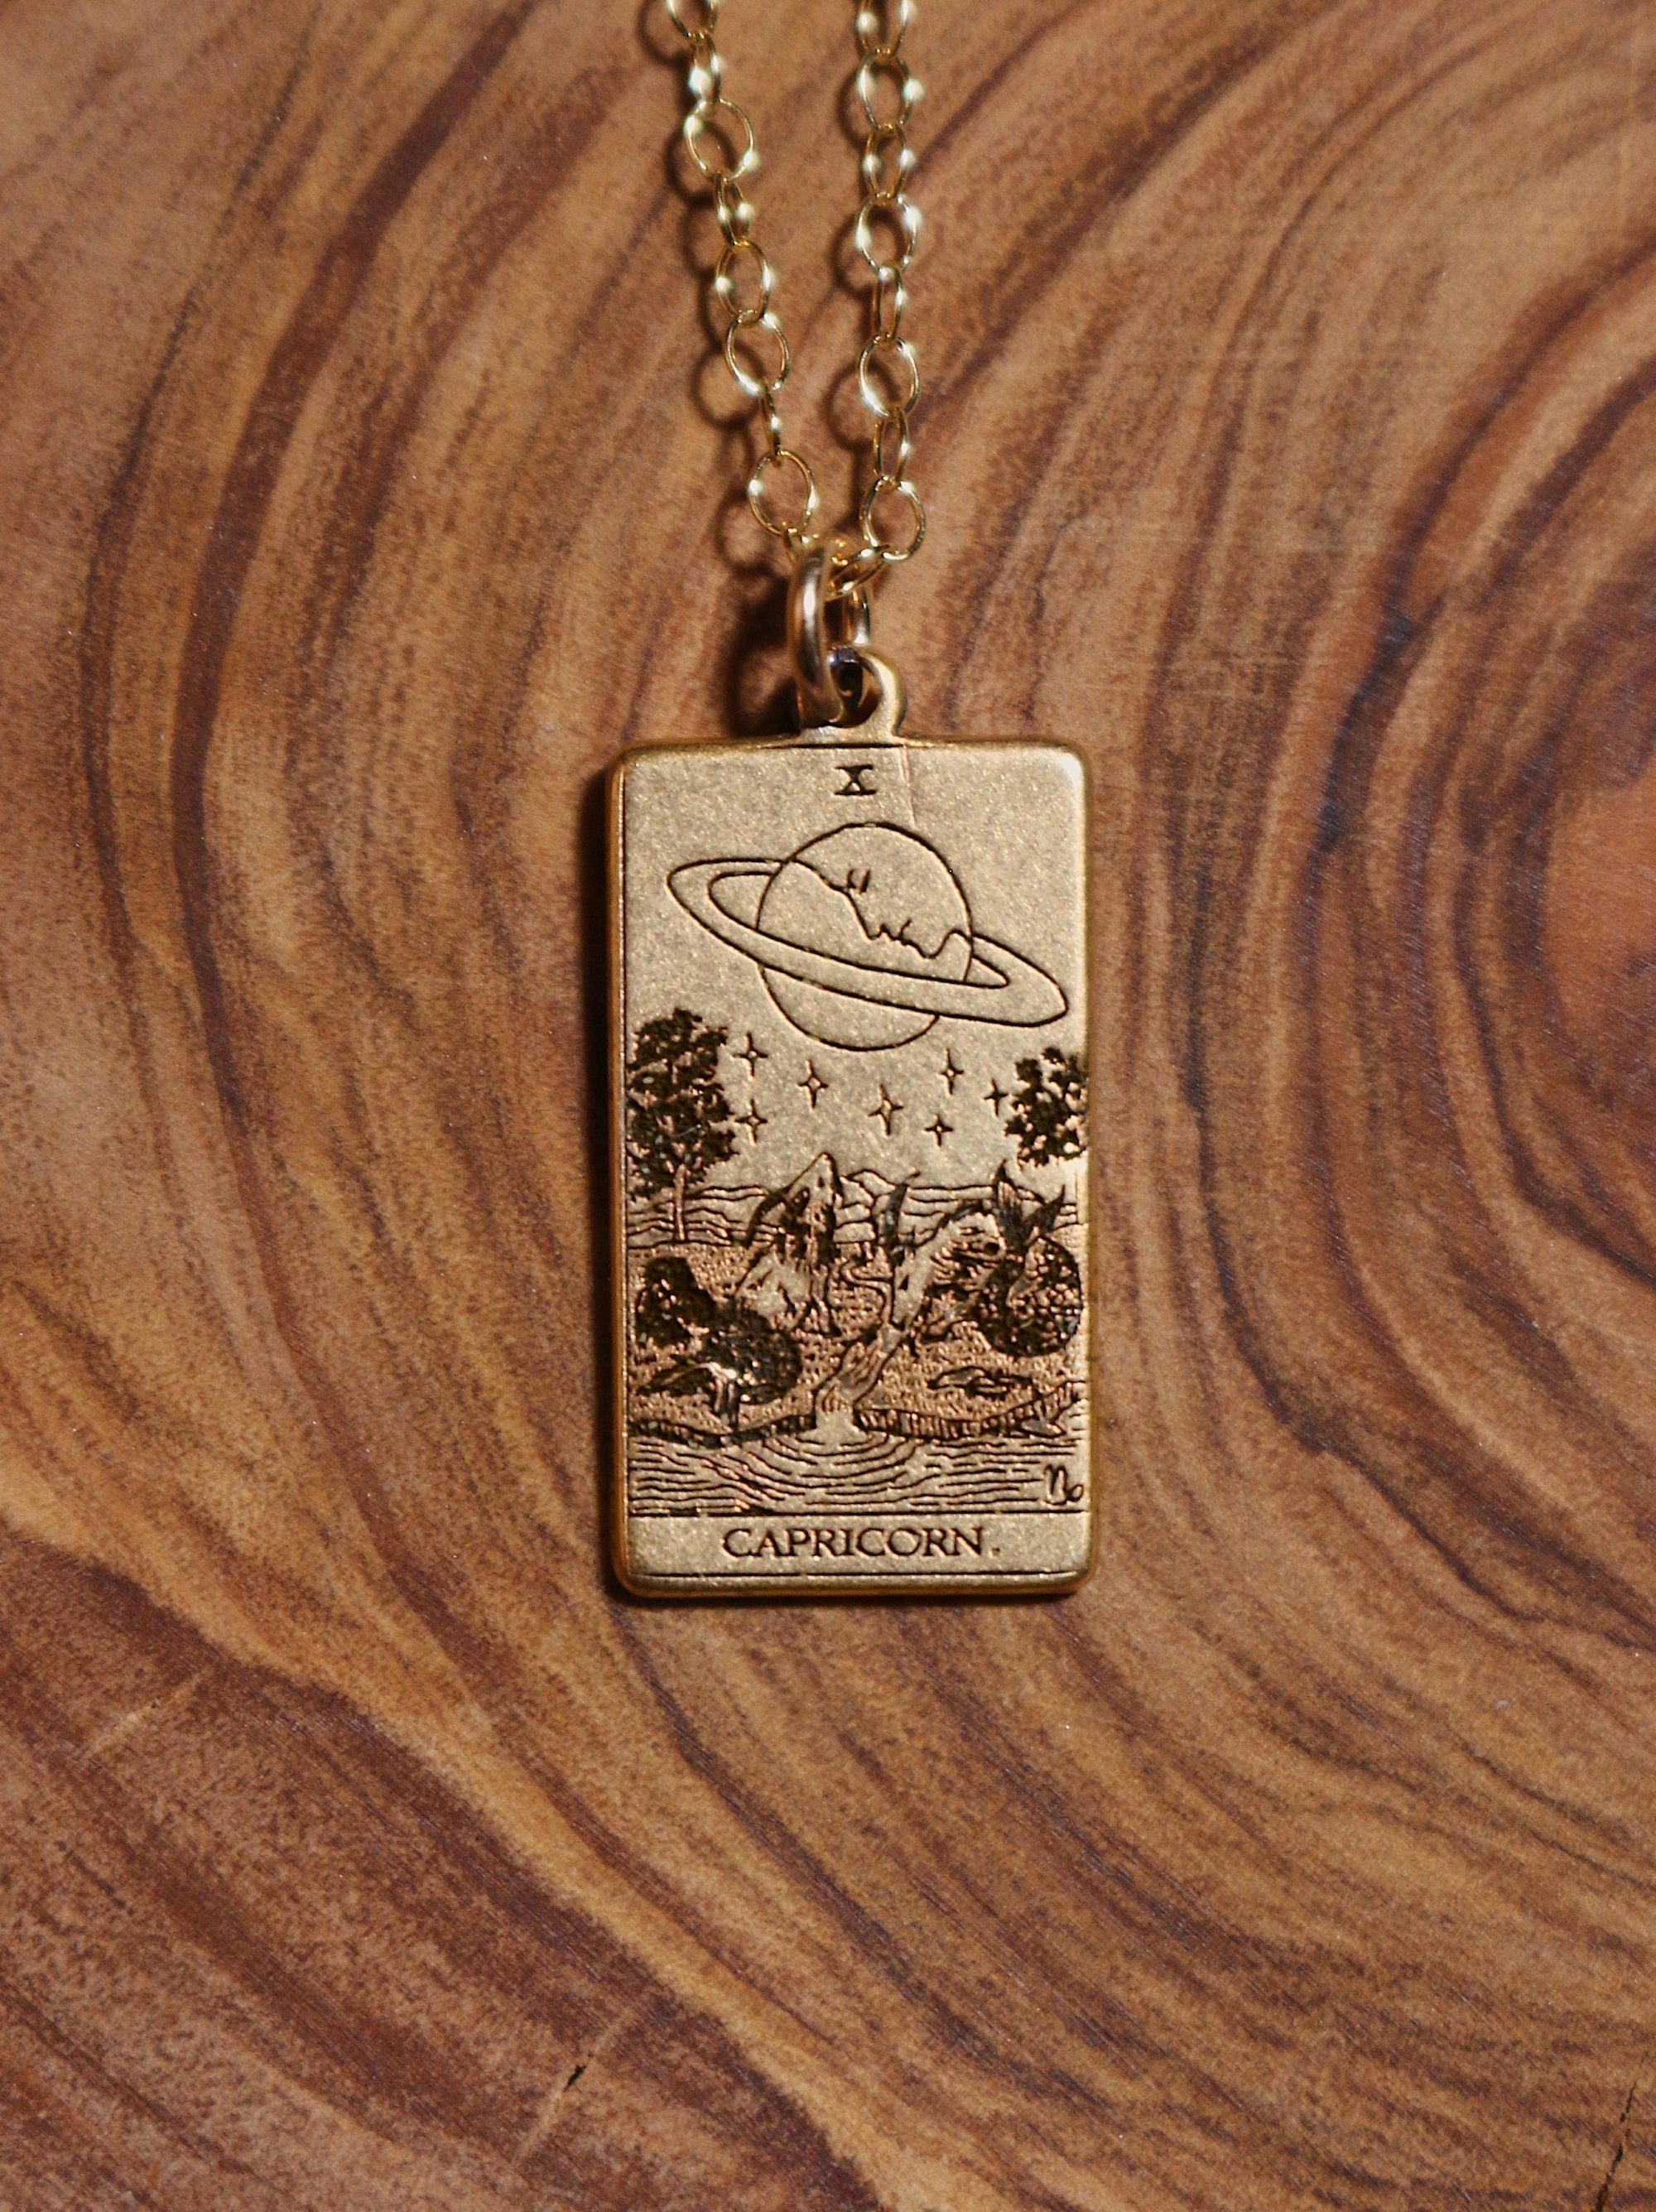 Capricorn The Moon Tarot Card Inspired Zodiac Necklace - Gold Filled